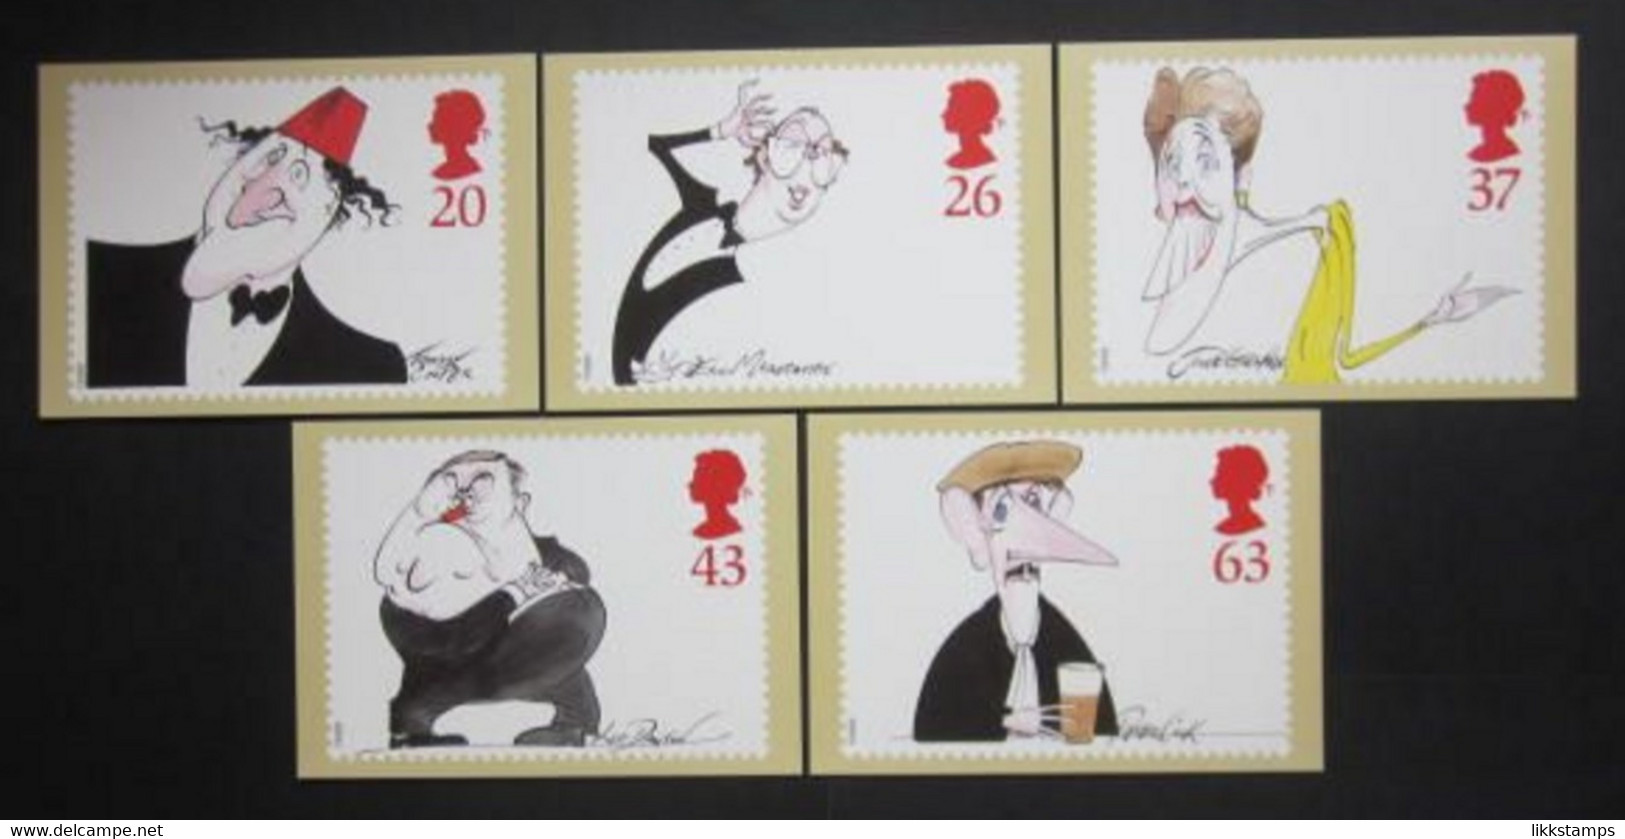 1998 COMEDIANS P.H.Q. CARDS UNUSED, ISSUE No. 197 (B) #00954 - PHQ Karten